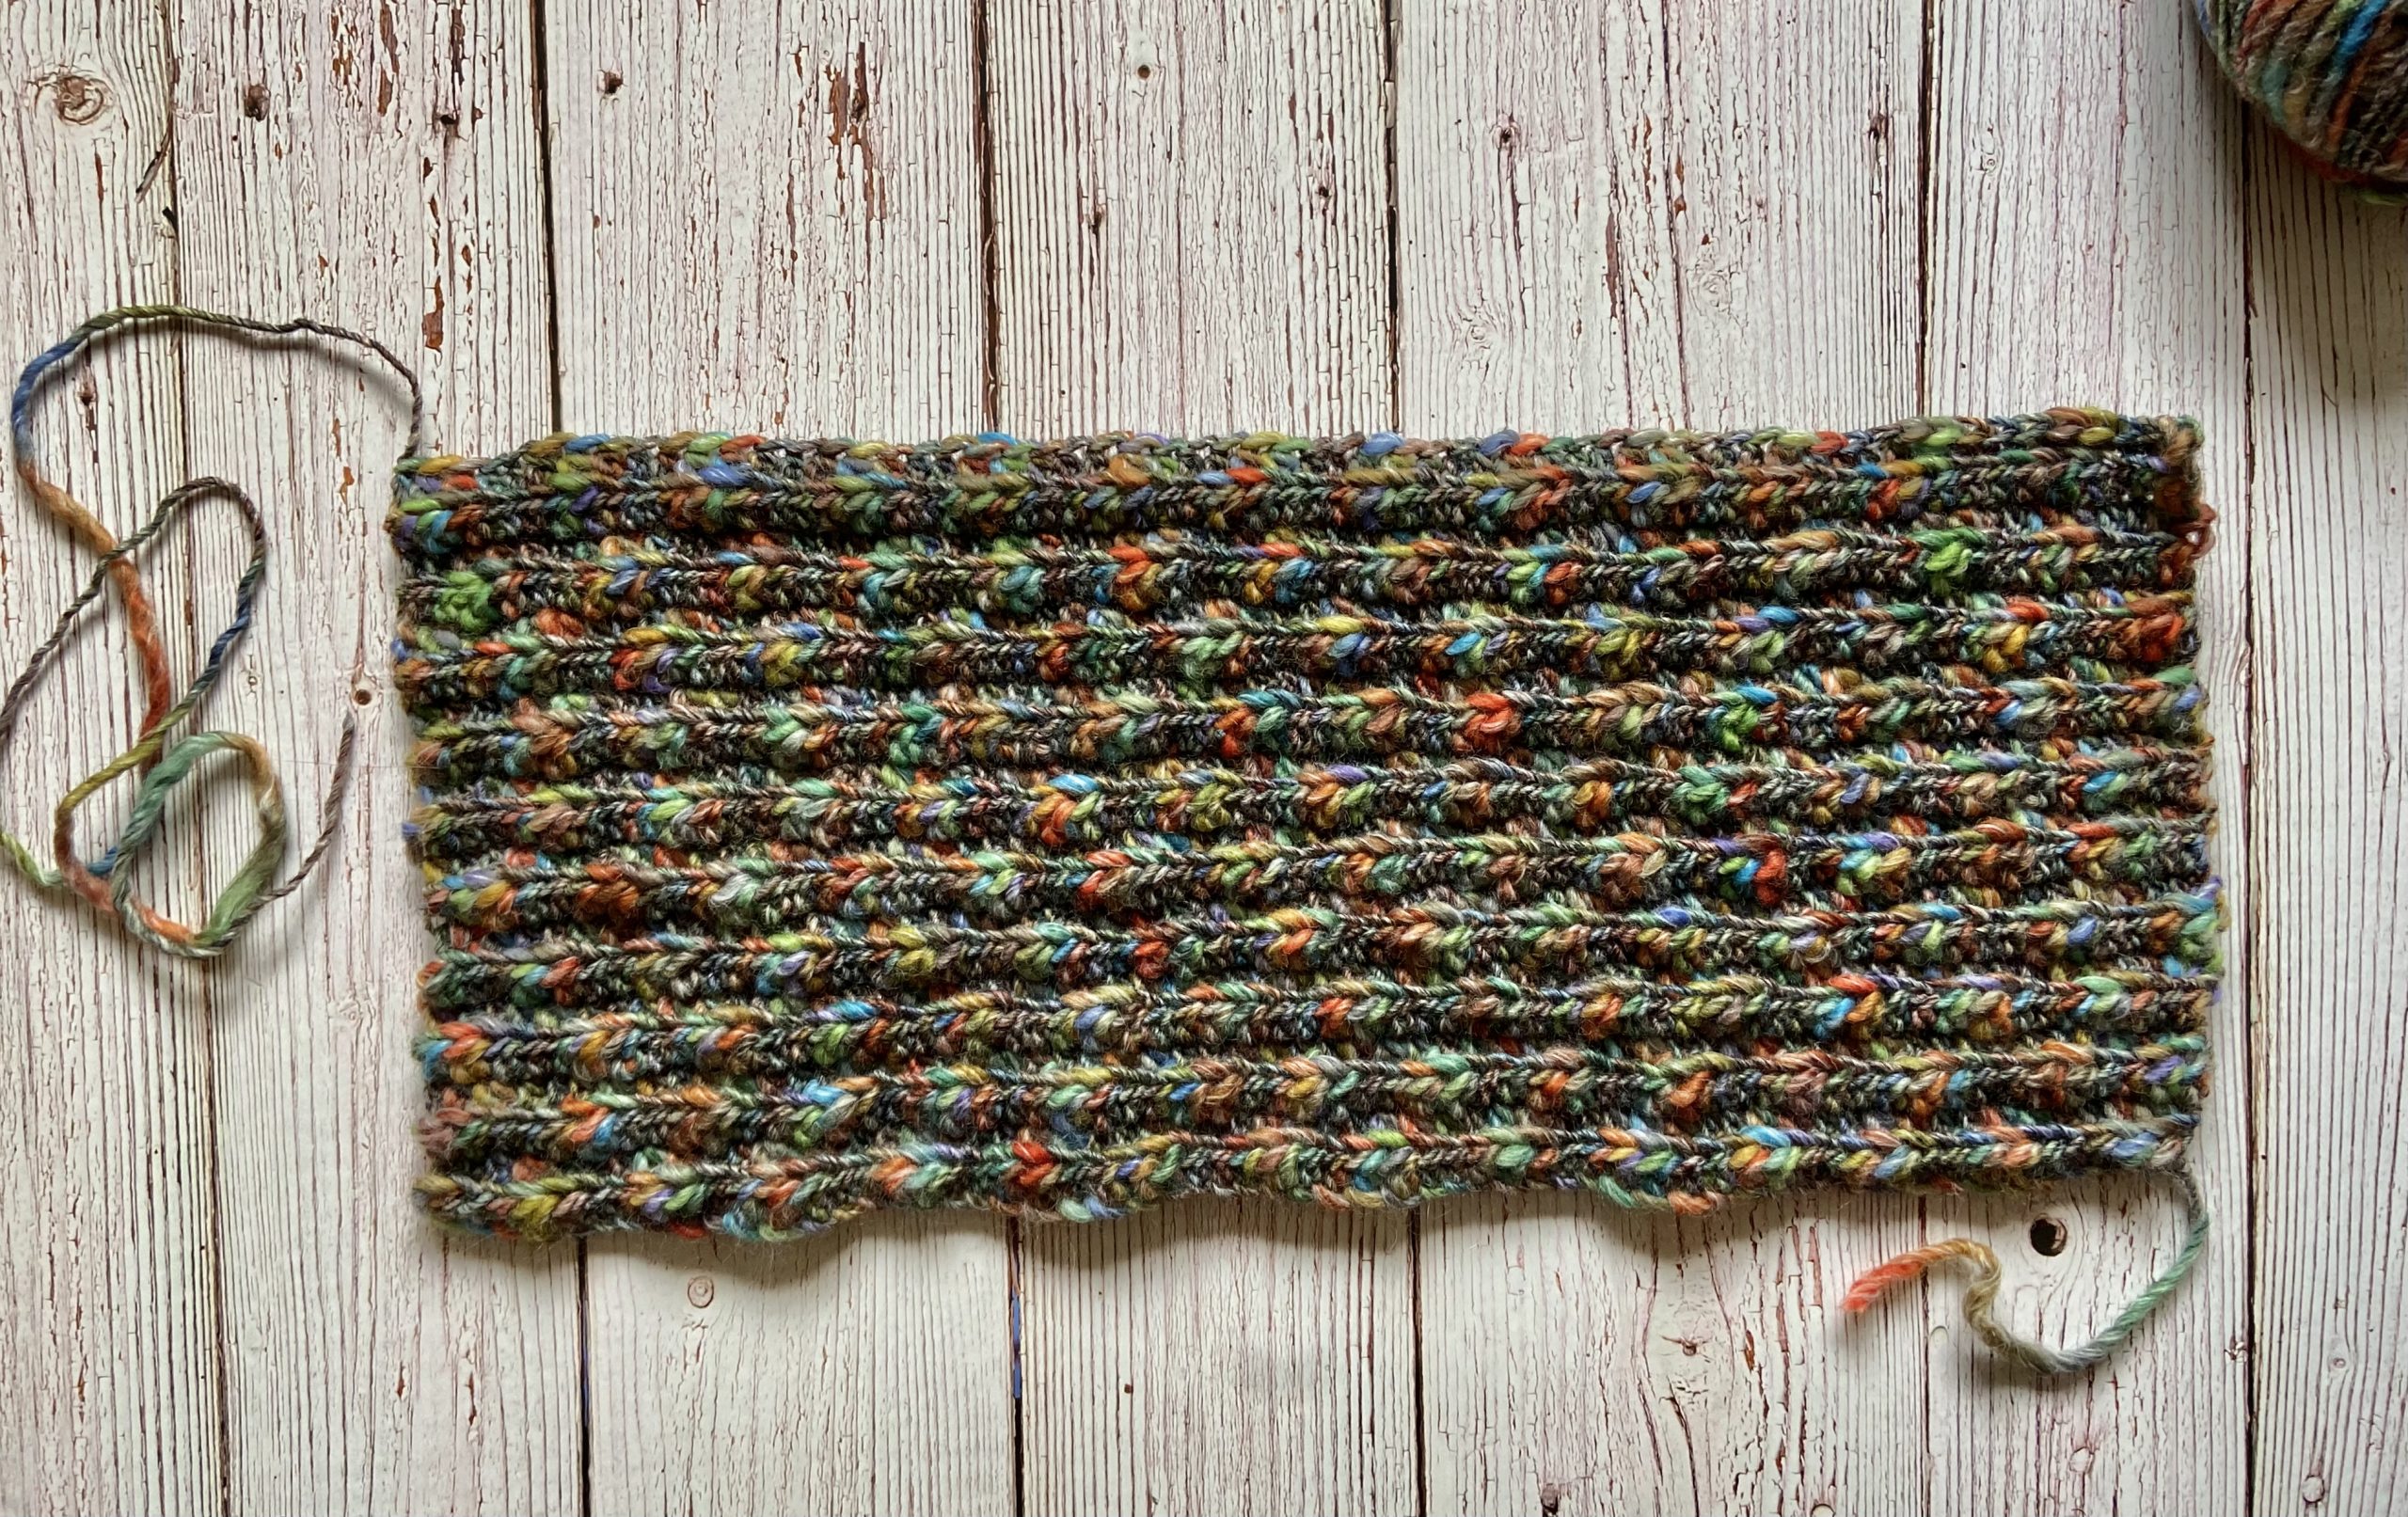 close up image of a crochet project using multi-colored yarn